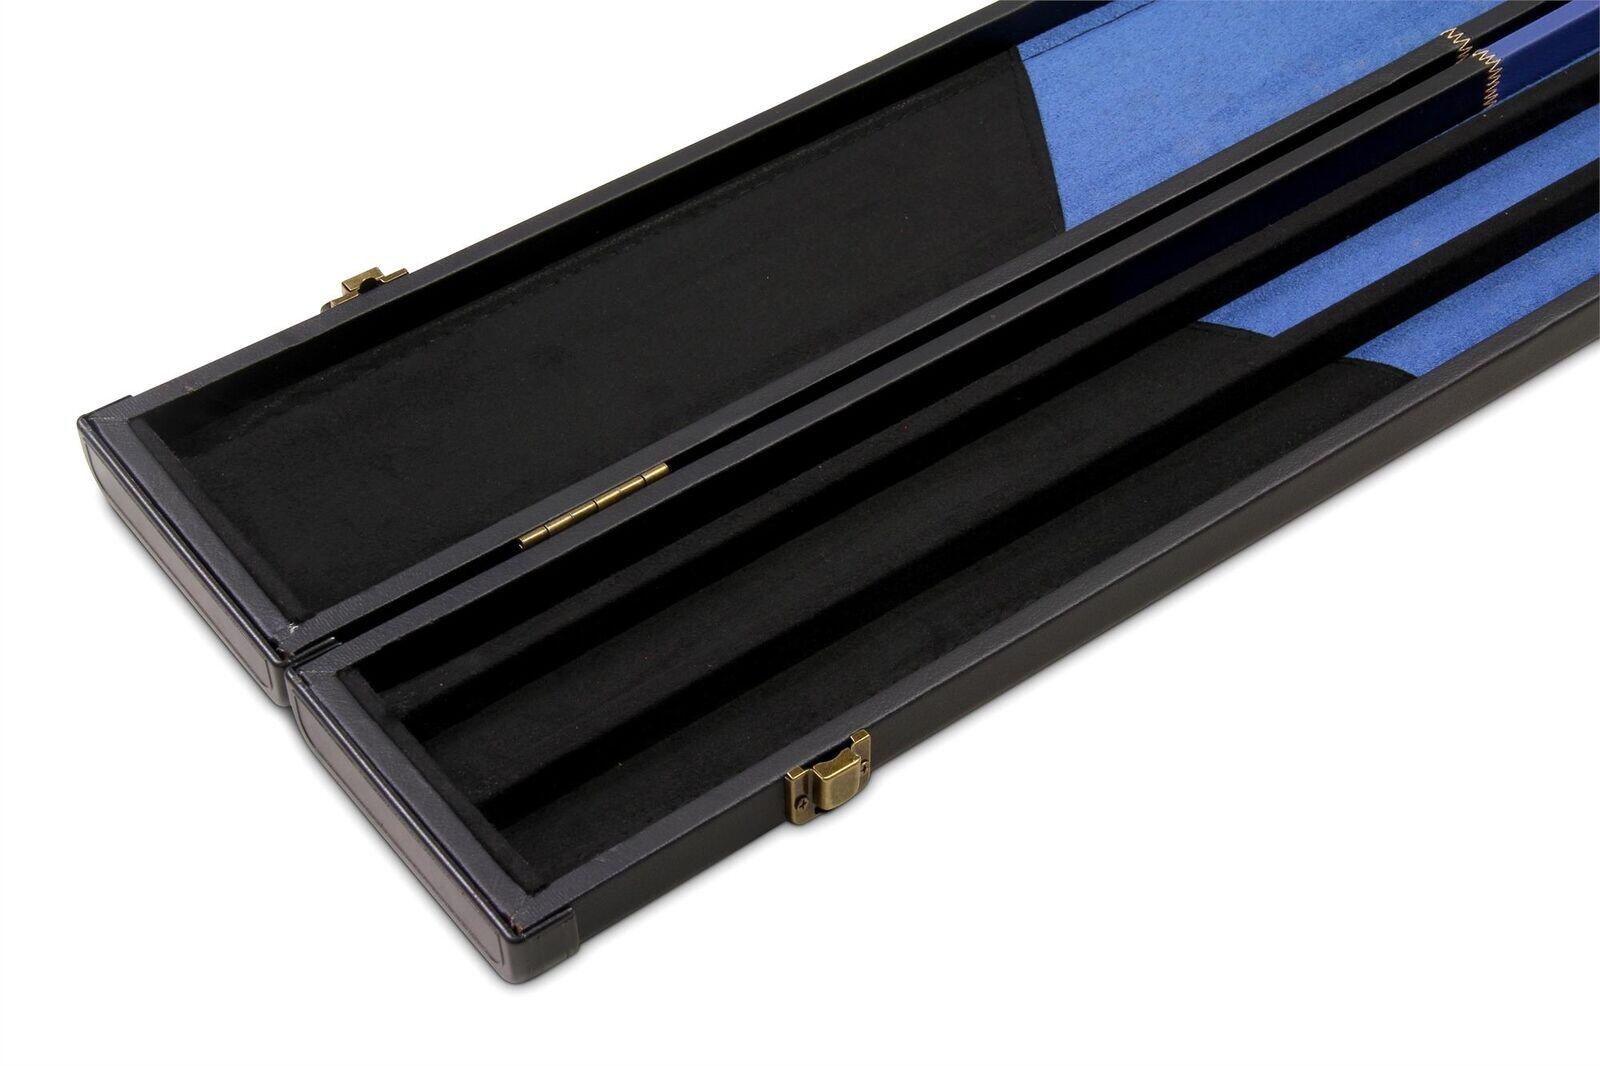 Deluxe 1 Piece WIDE BLUE CHEQUERED Snooker Pool Cue Case - Holds 3 Cues 6/7